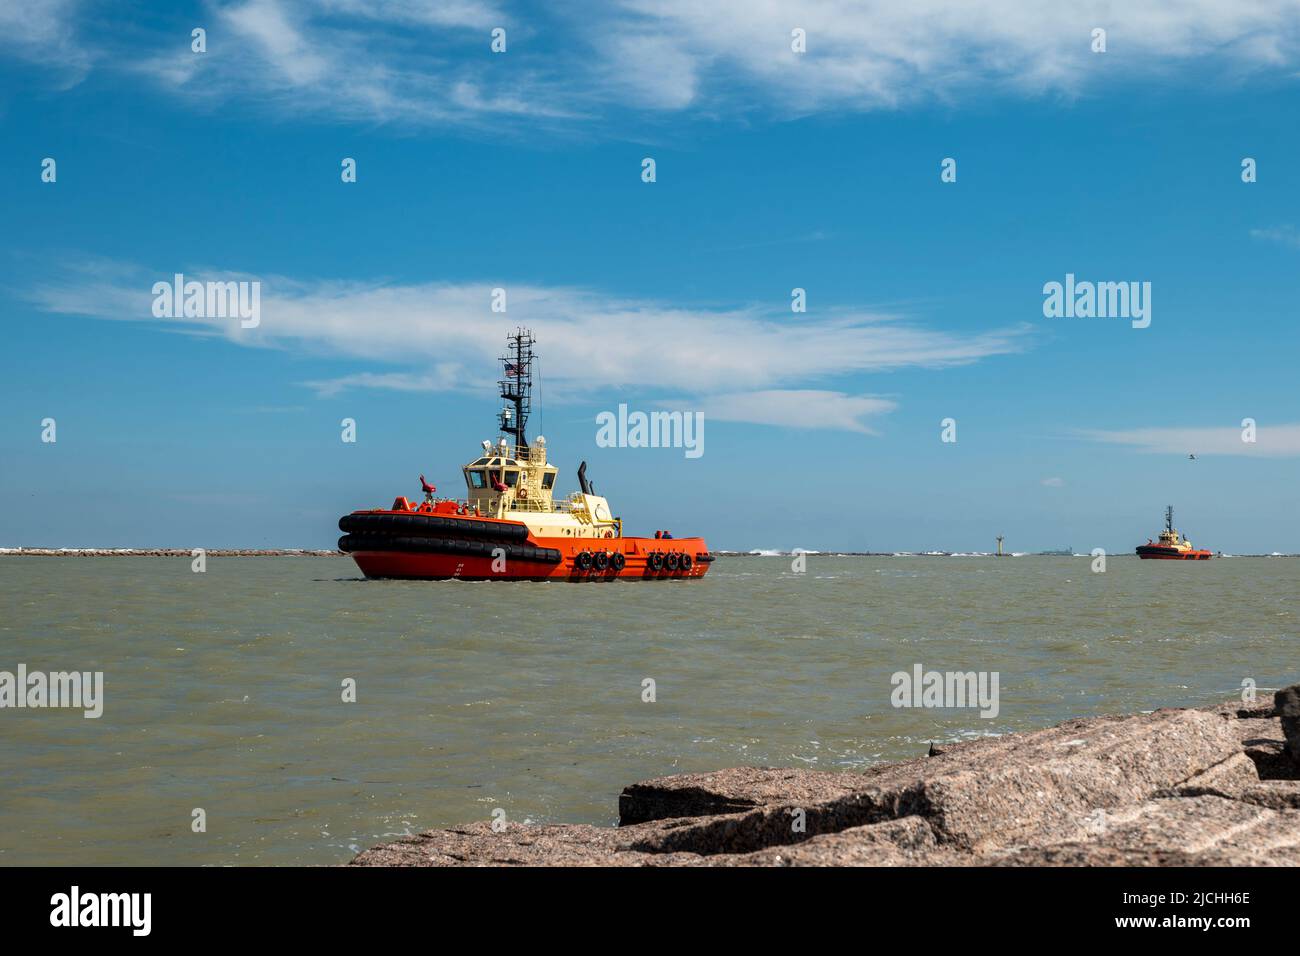 Two tugboats cruising in from sea in a shipping channel after guiding an oil tanker, on a sunny day with blue sky and a few clouds. Stock Photo